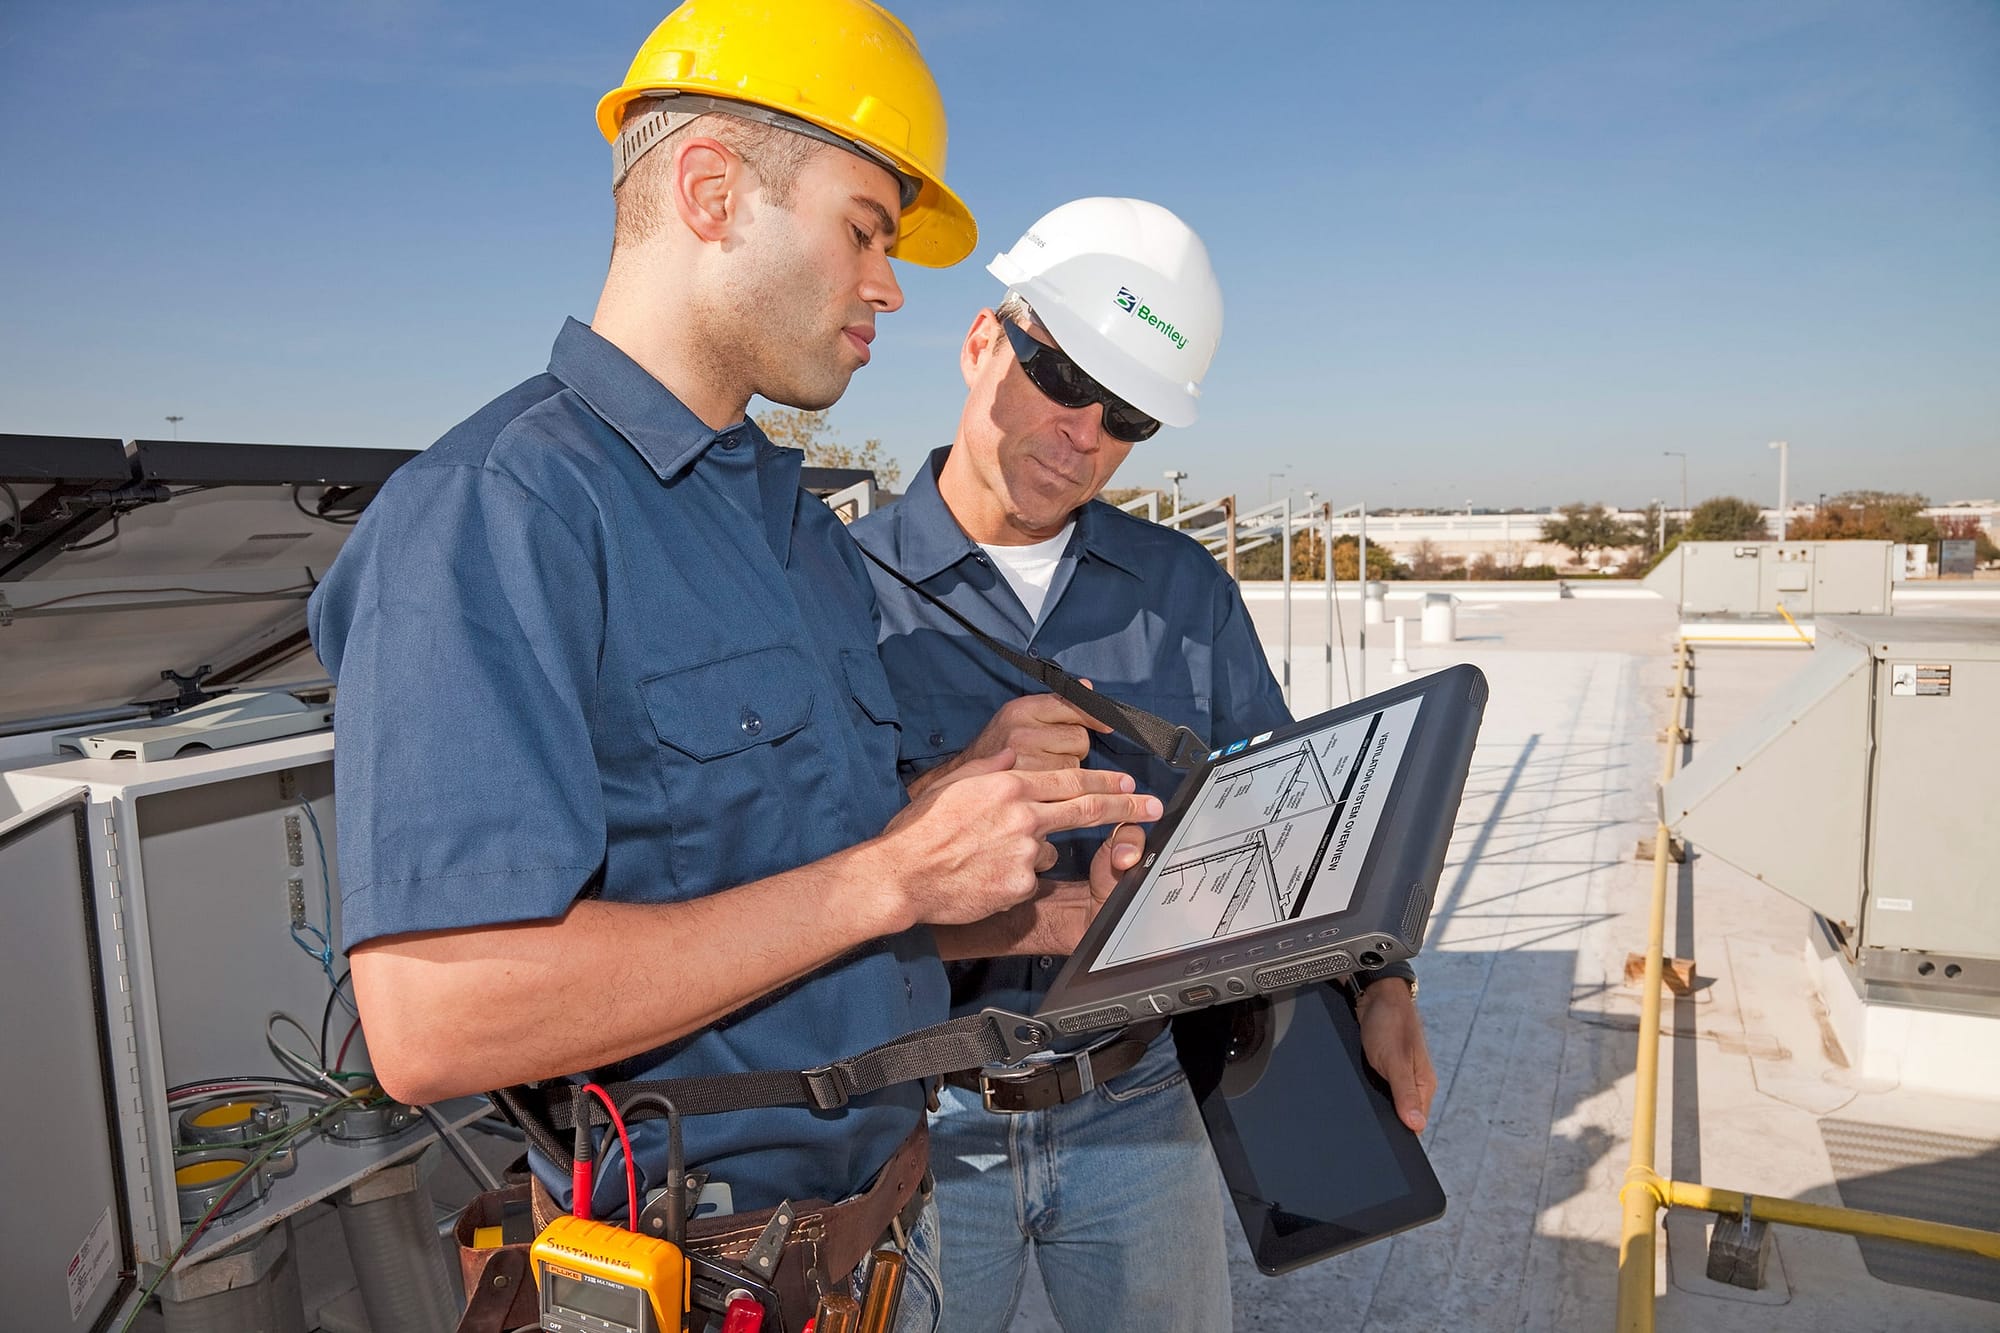 Two men inspecting HVAC with field service management app on tablet